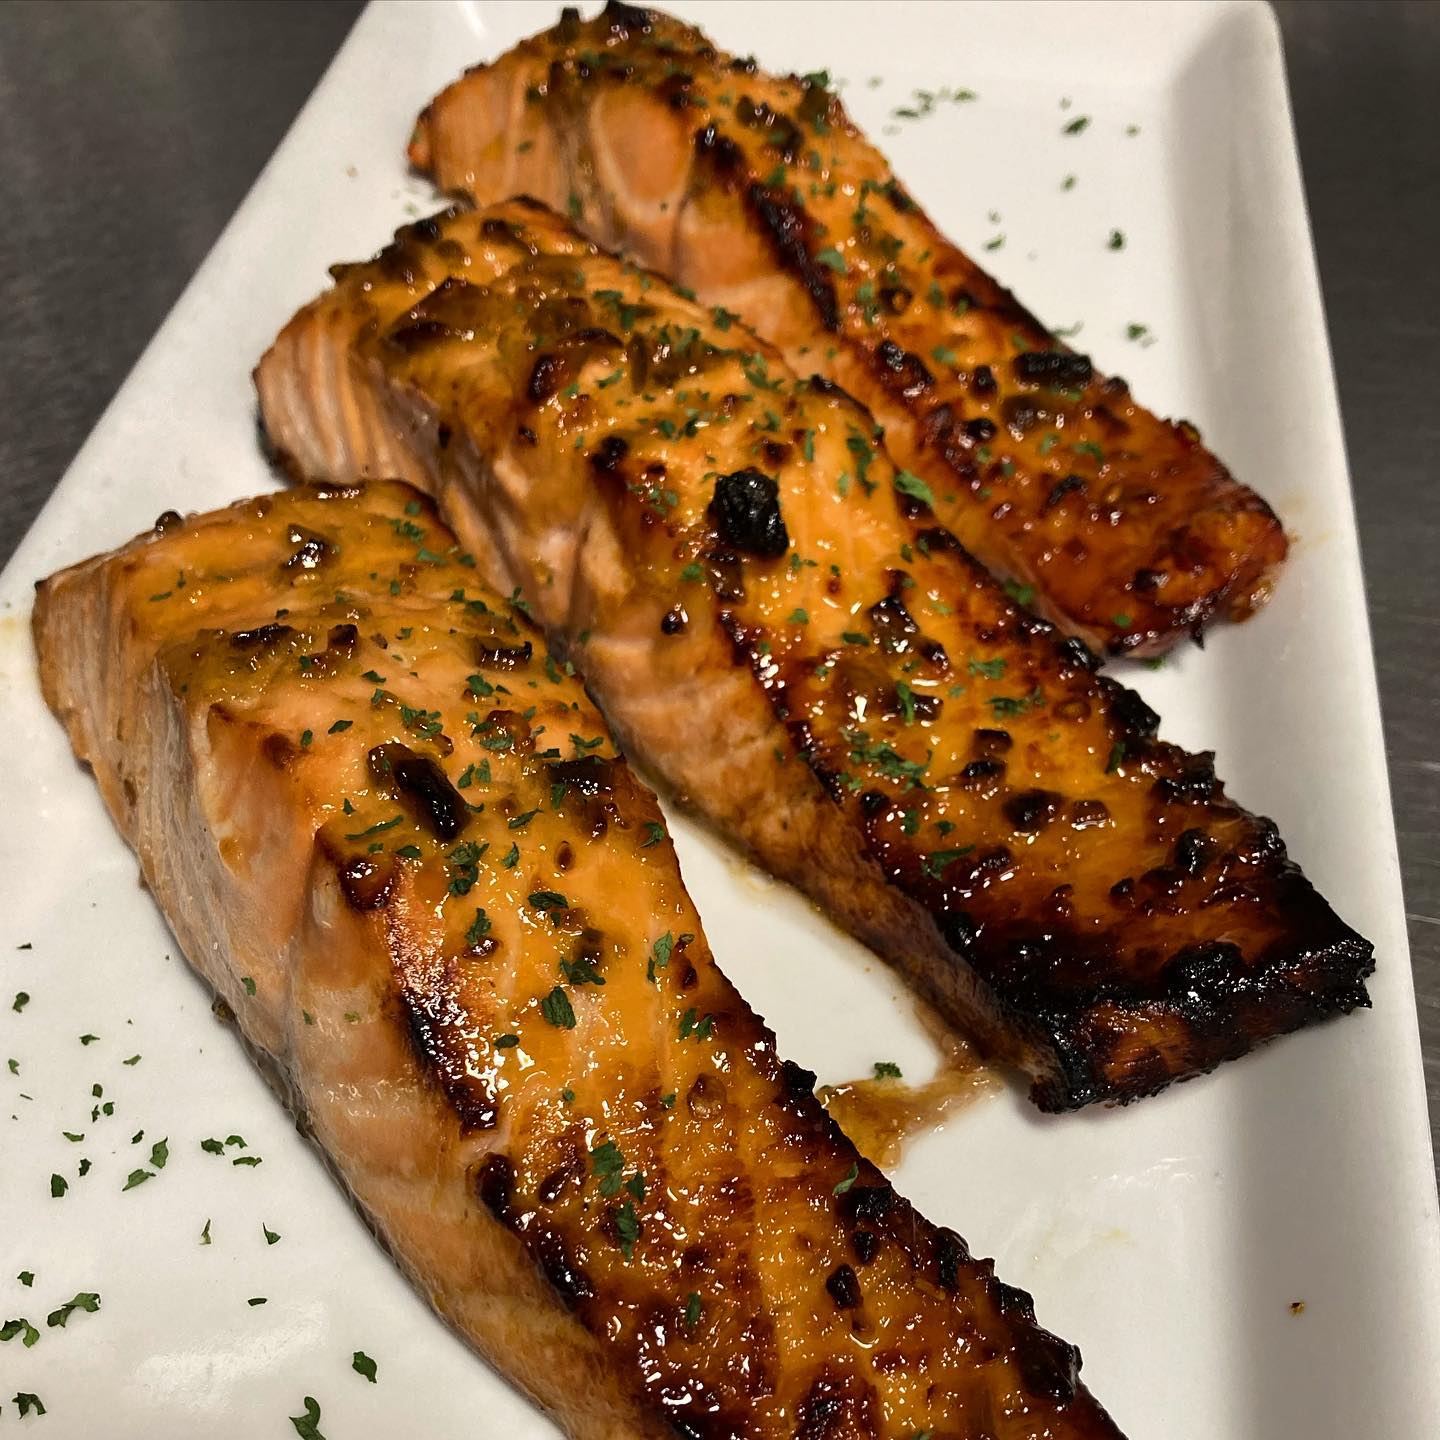 Our pre-cooked Salmon with housemade sweet teriyaki glaze is an easy and delicious meal option for those days when you don’t feel like cooking. Available daily in the fish market.